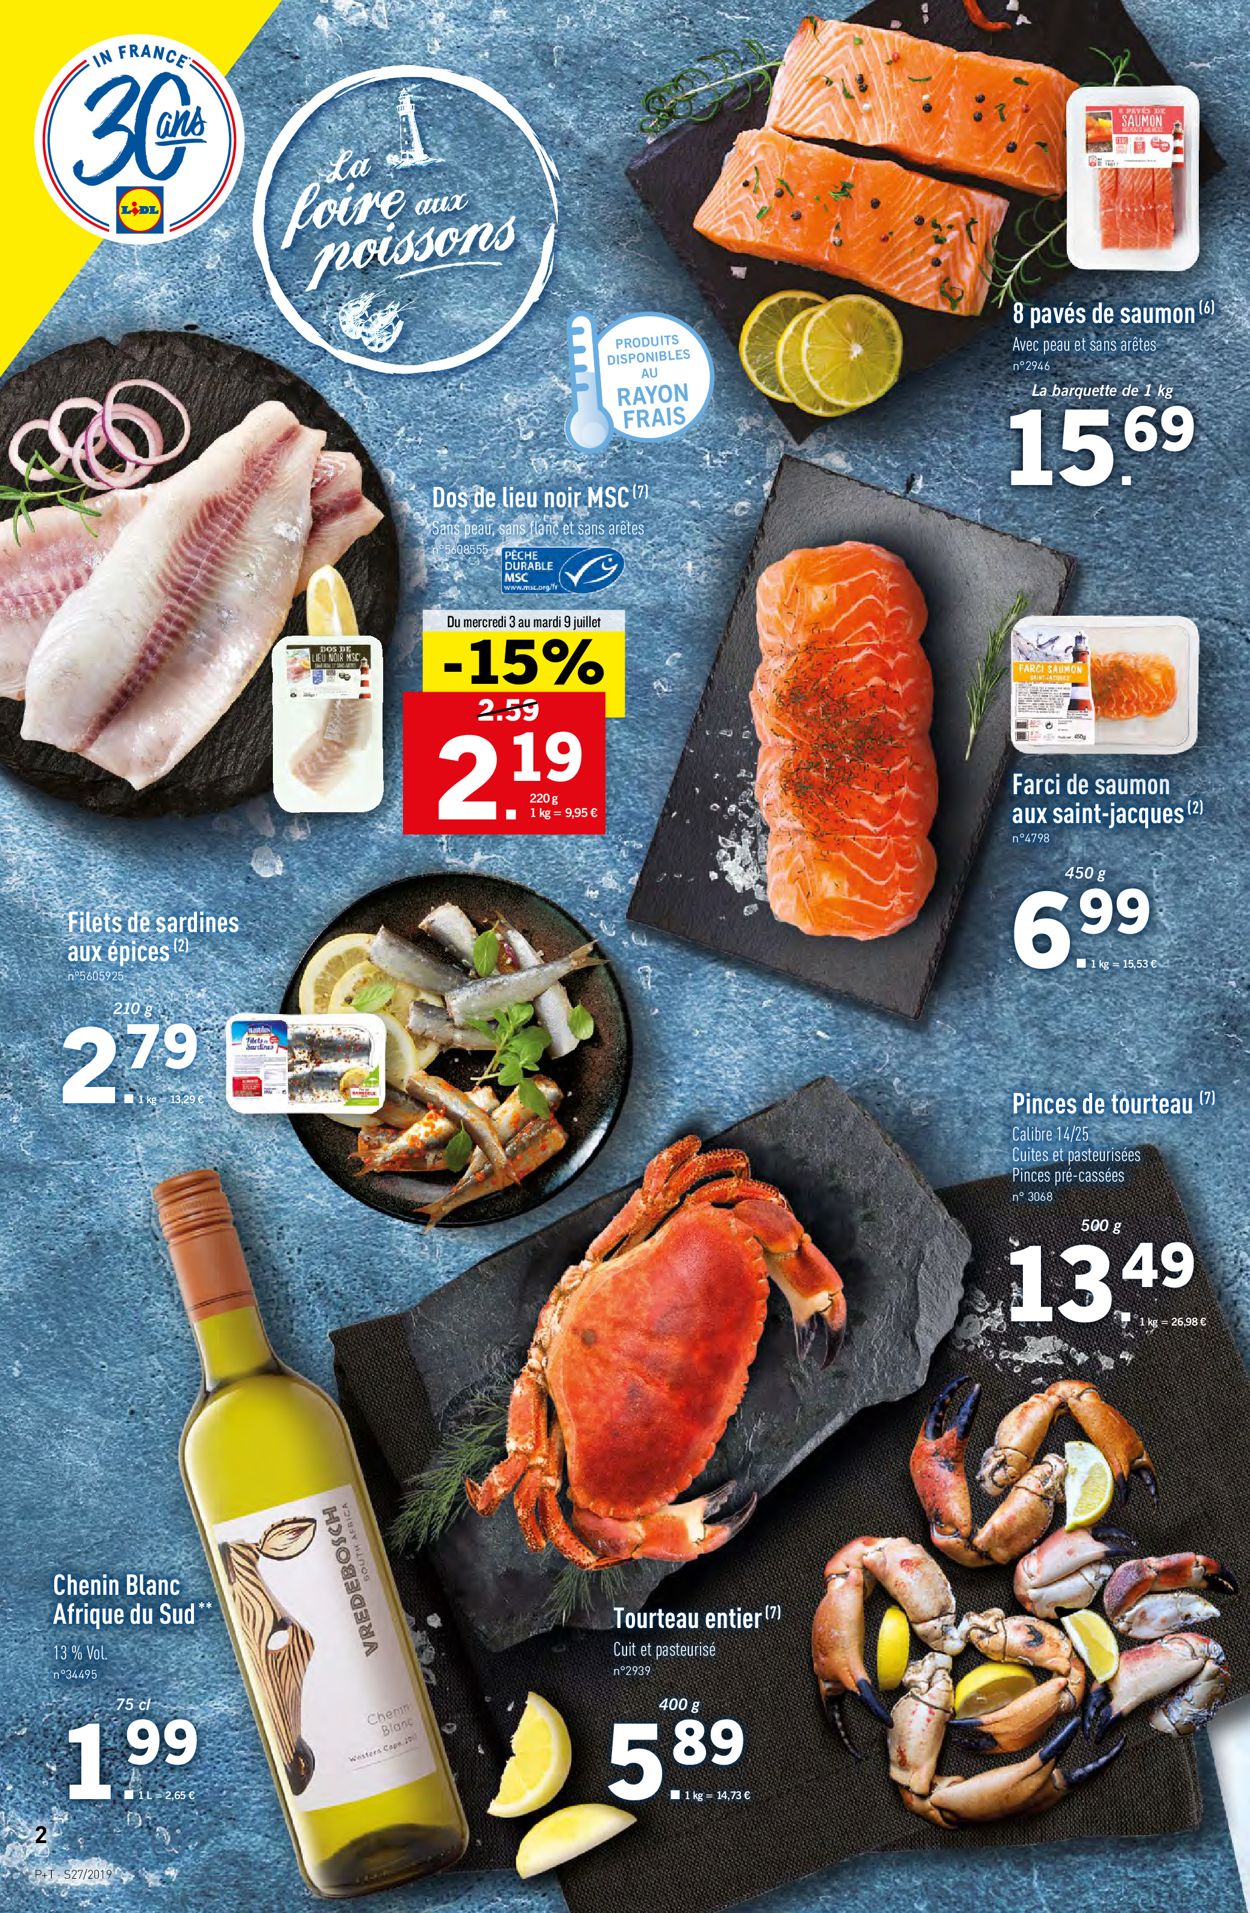 Lidl Catalogue - 03.07-09.07.2019 (Page 2)